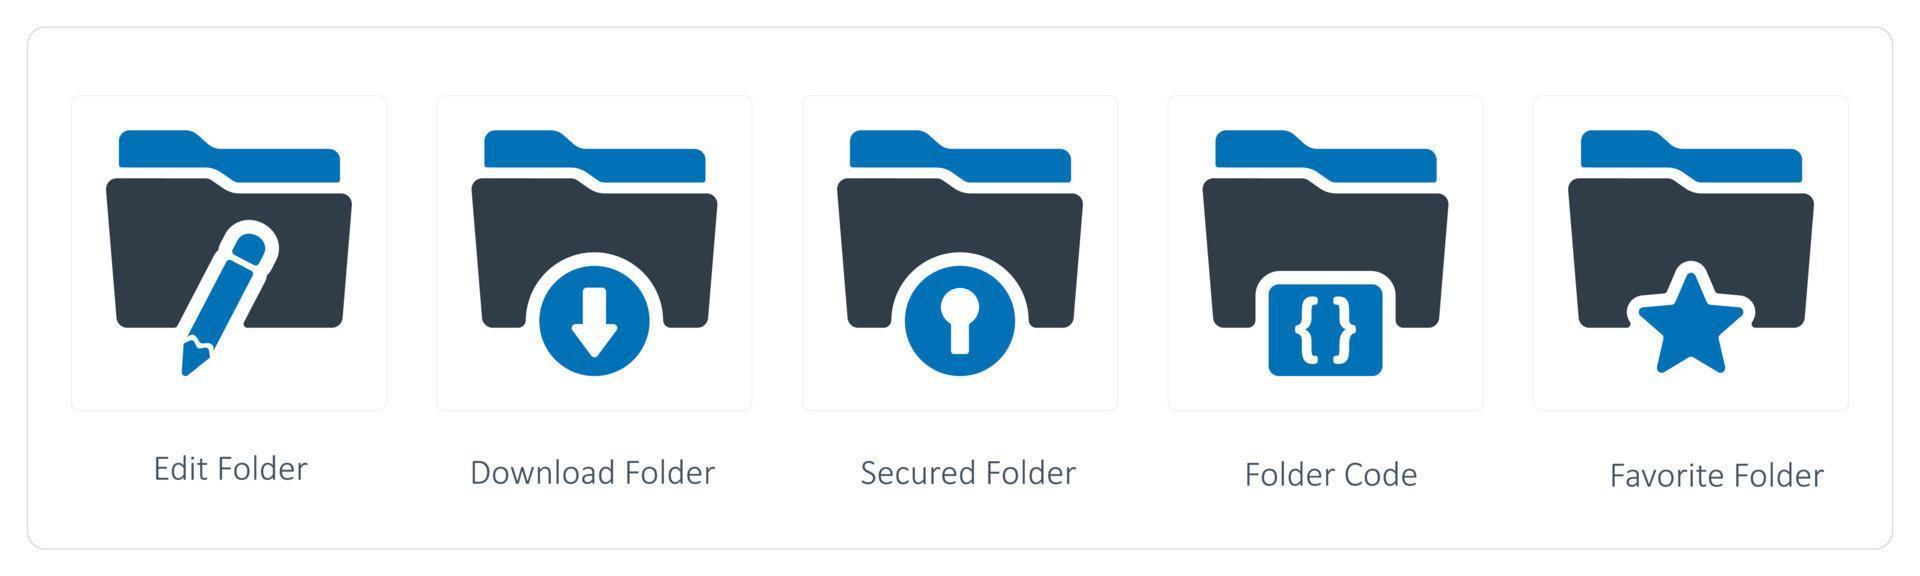 A set of 5 Folder icons such as edit, download and secured folder vector